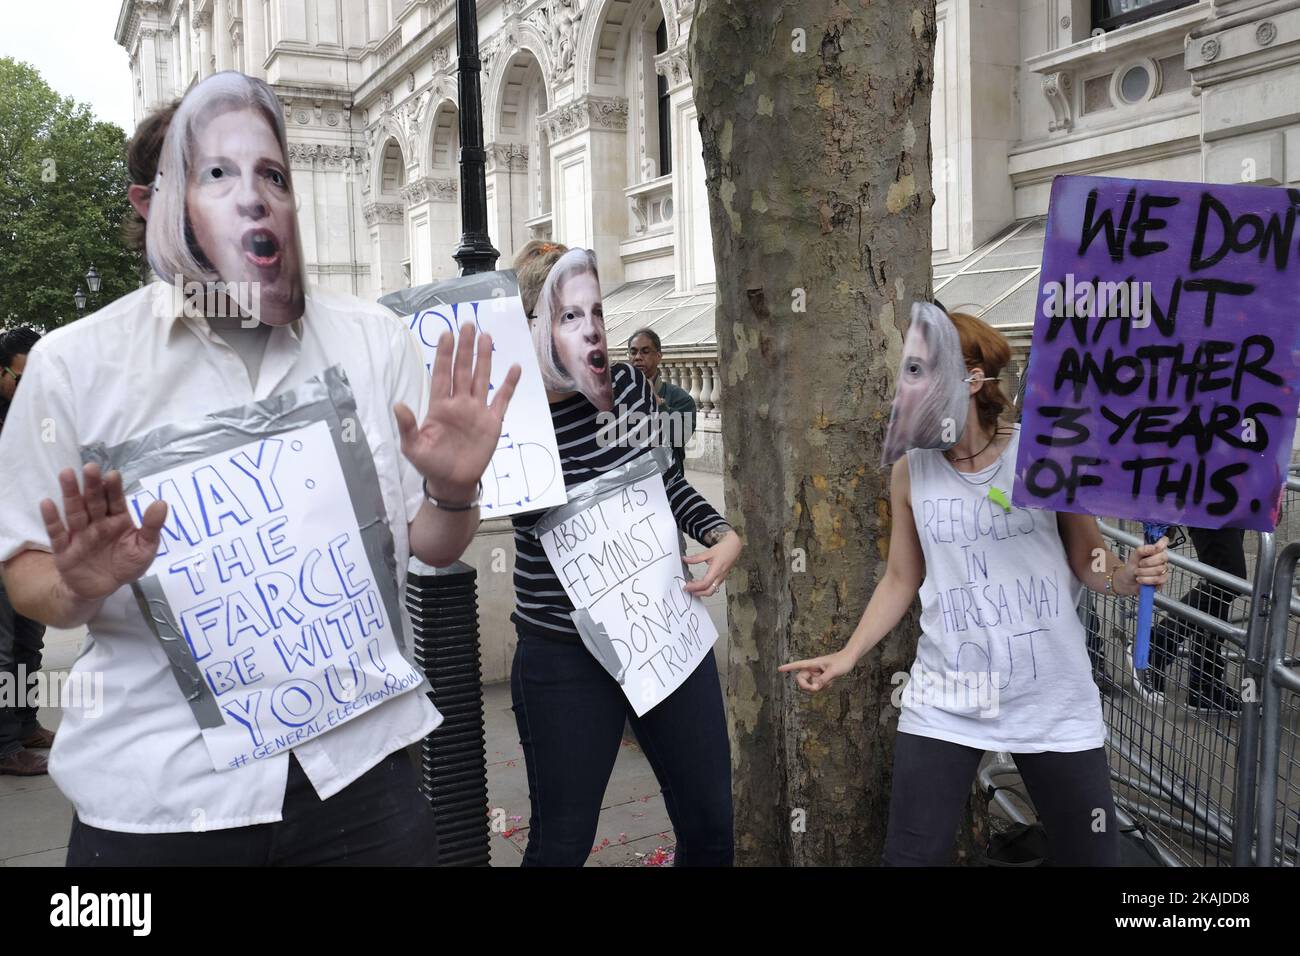 Crowds and protests around Downing street on 13 July 2016 in London, England as David Cameron leaves office for the last time and the new Prime Minister Theresa May enters Donning street. Protests included those who where against Conservative party budget cuts and also those calling for article 50 of the Lisbon treaty to be invoked immediately (Photo by Jay Shaw Baker/NurPhoto) *** Please Use Credit from Credit Field *** Stock Photo